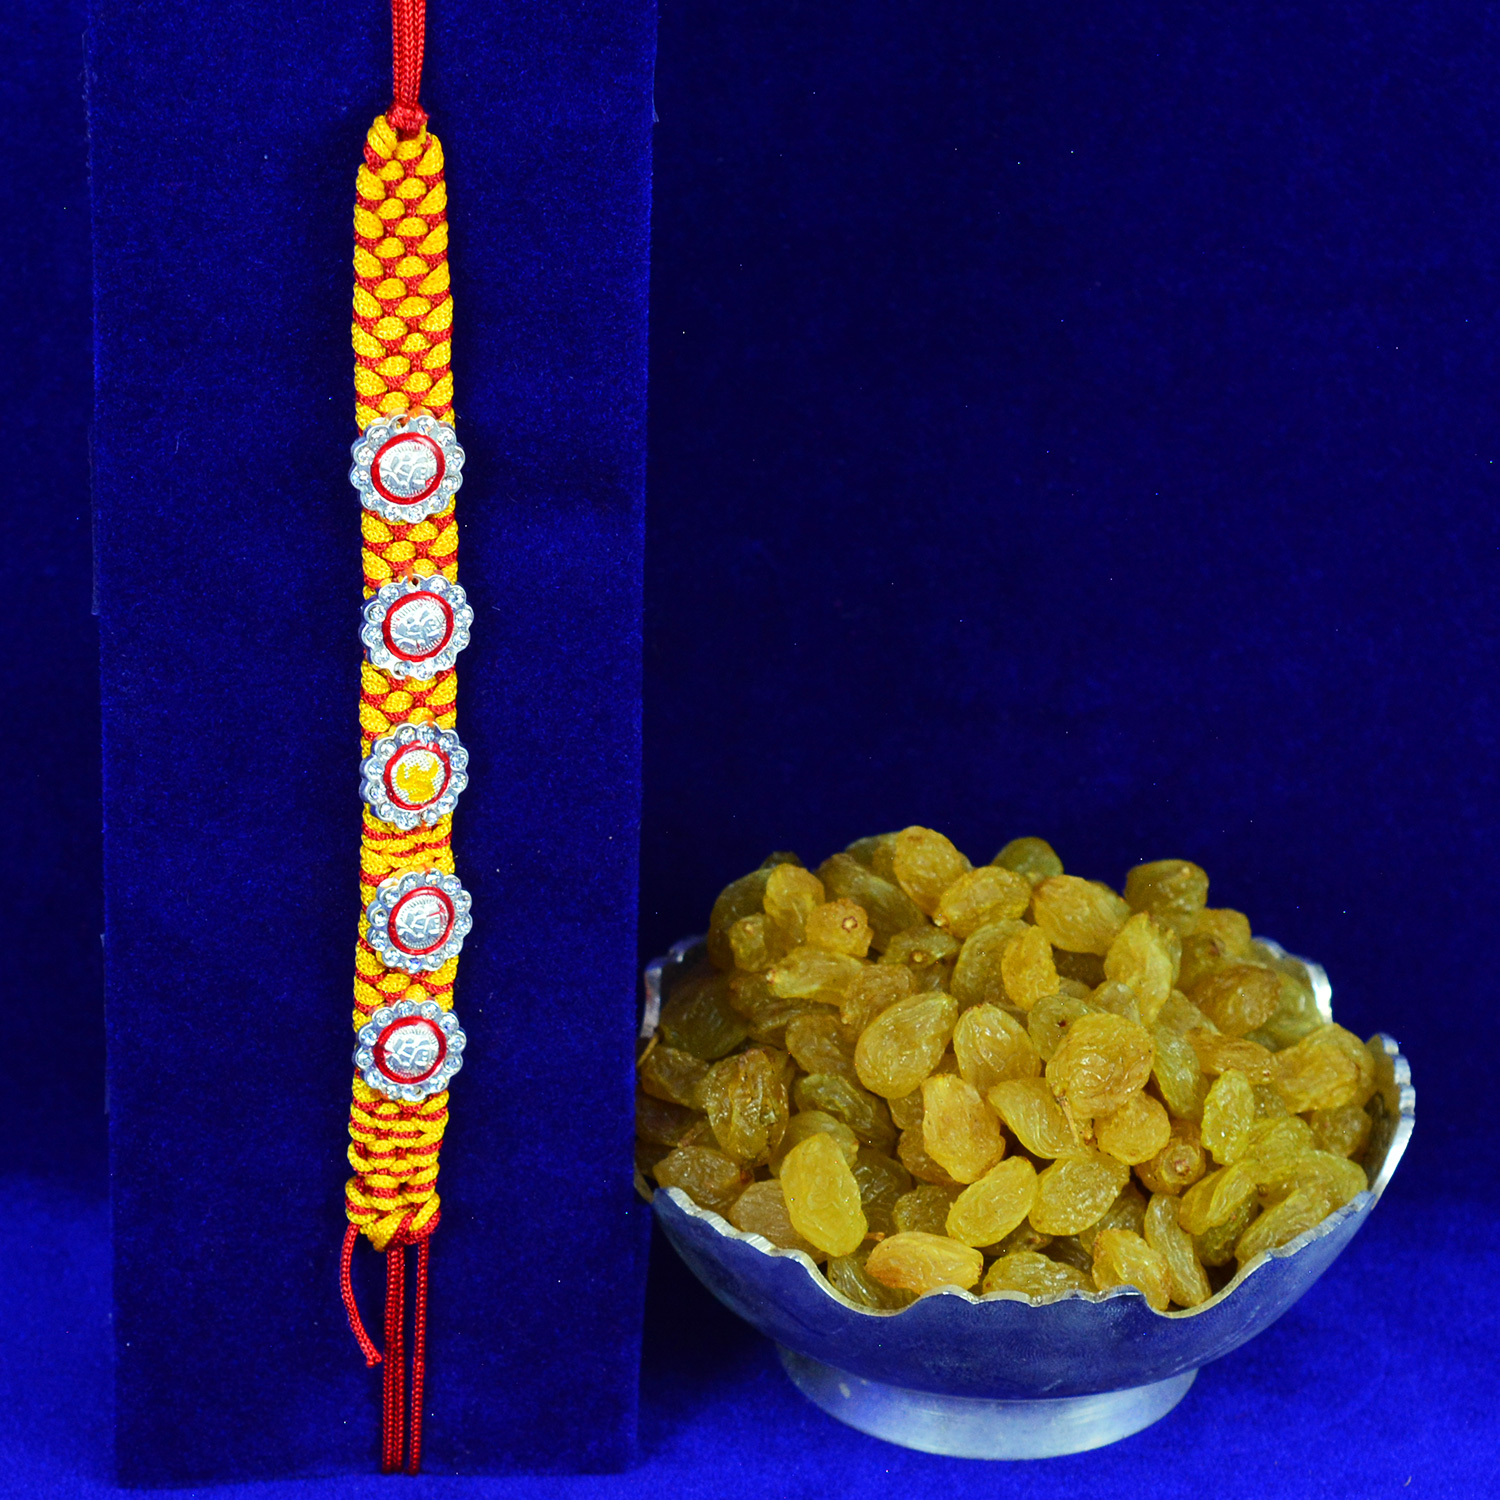 Floral Design Mauli Thread Pure Silver Brother Rakhi with Raisins Dry Fruits